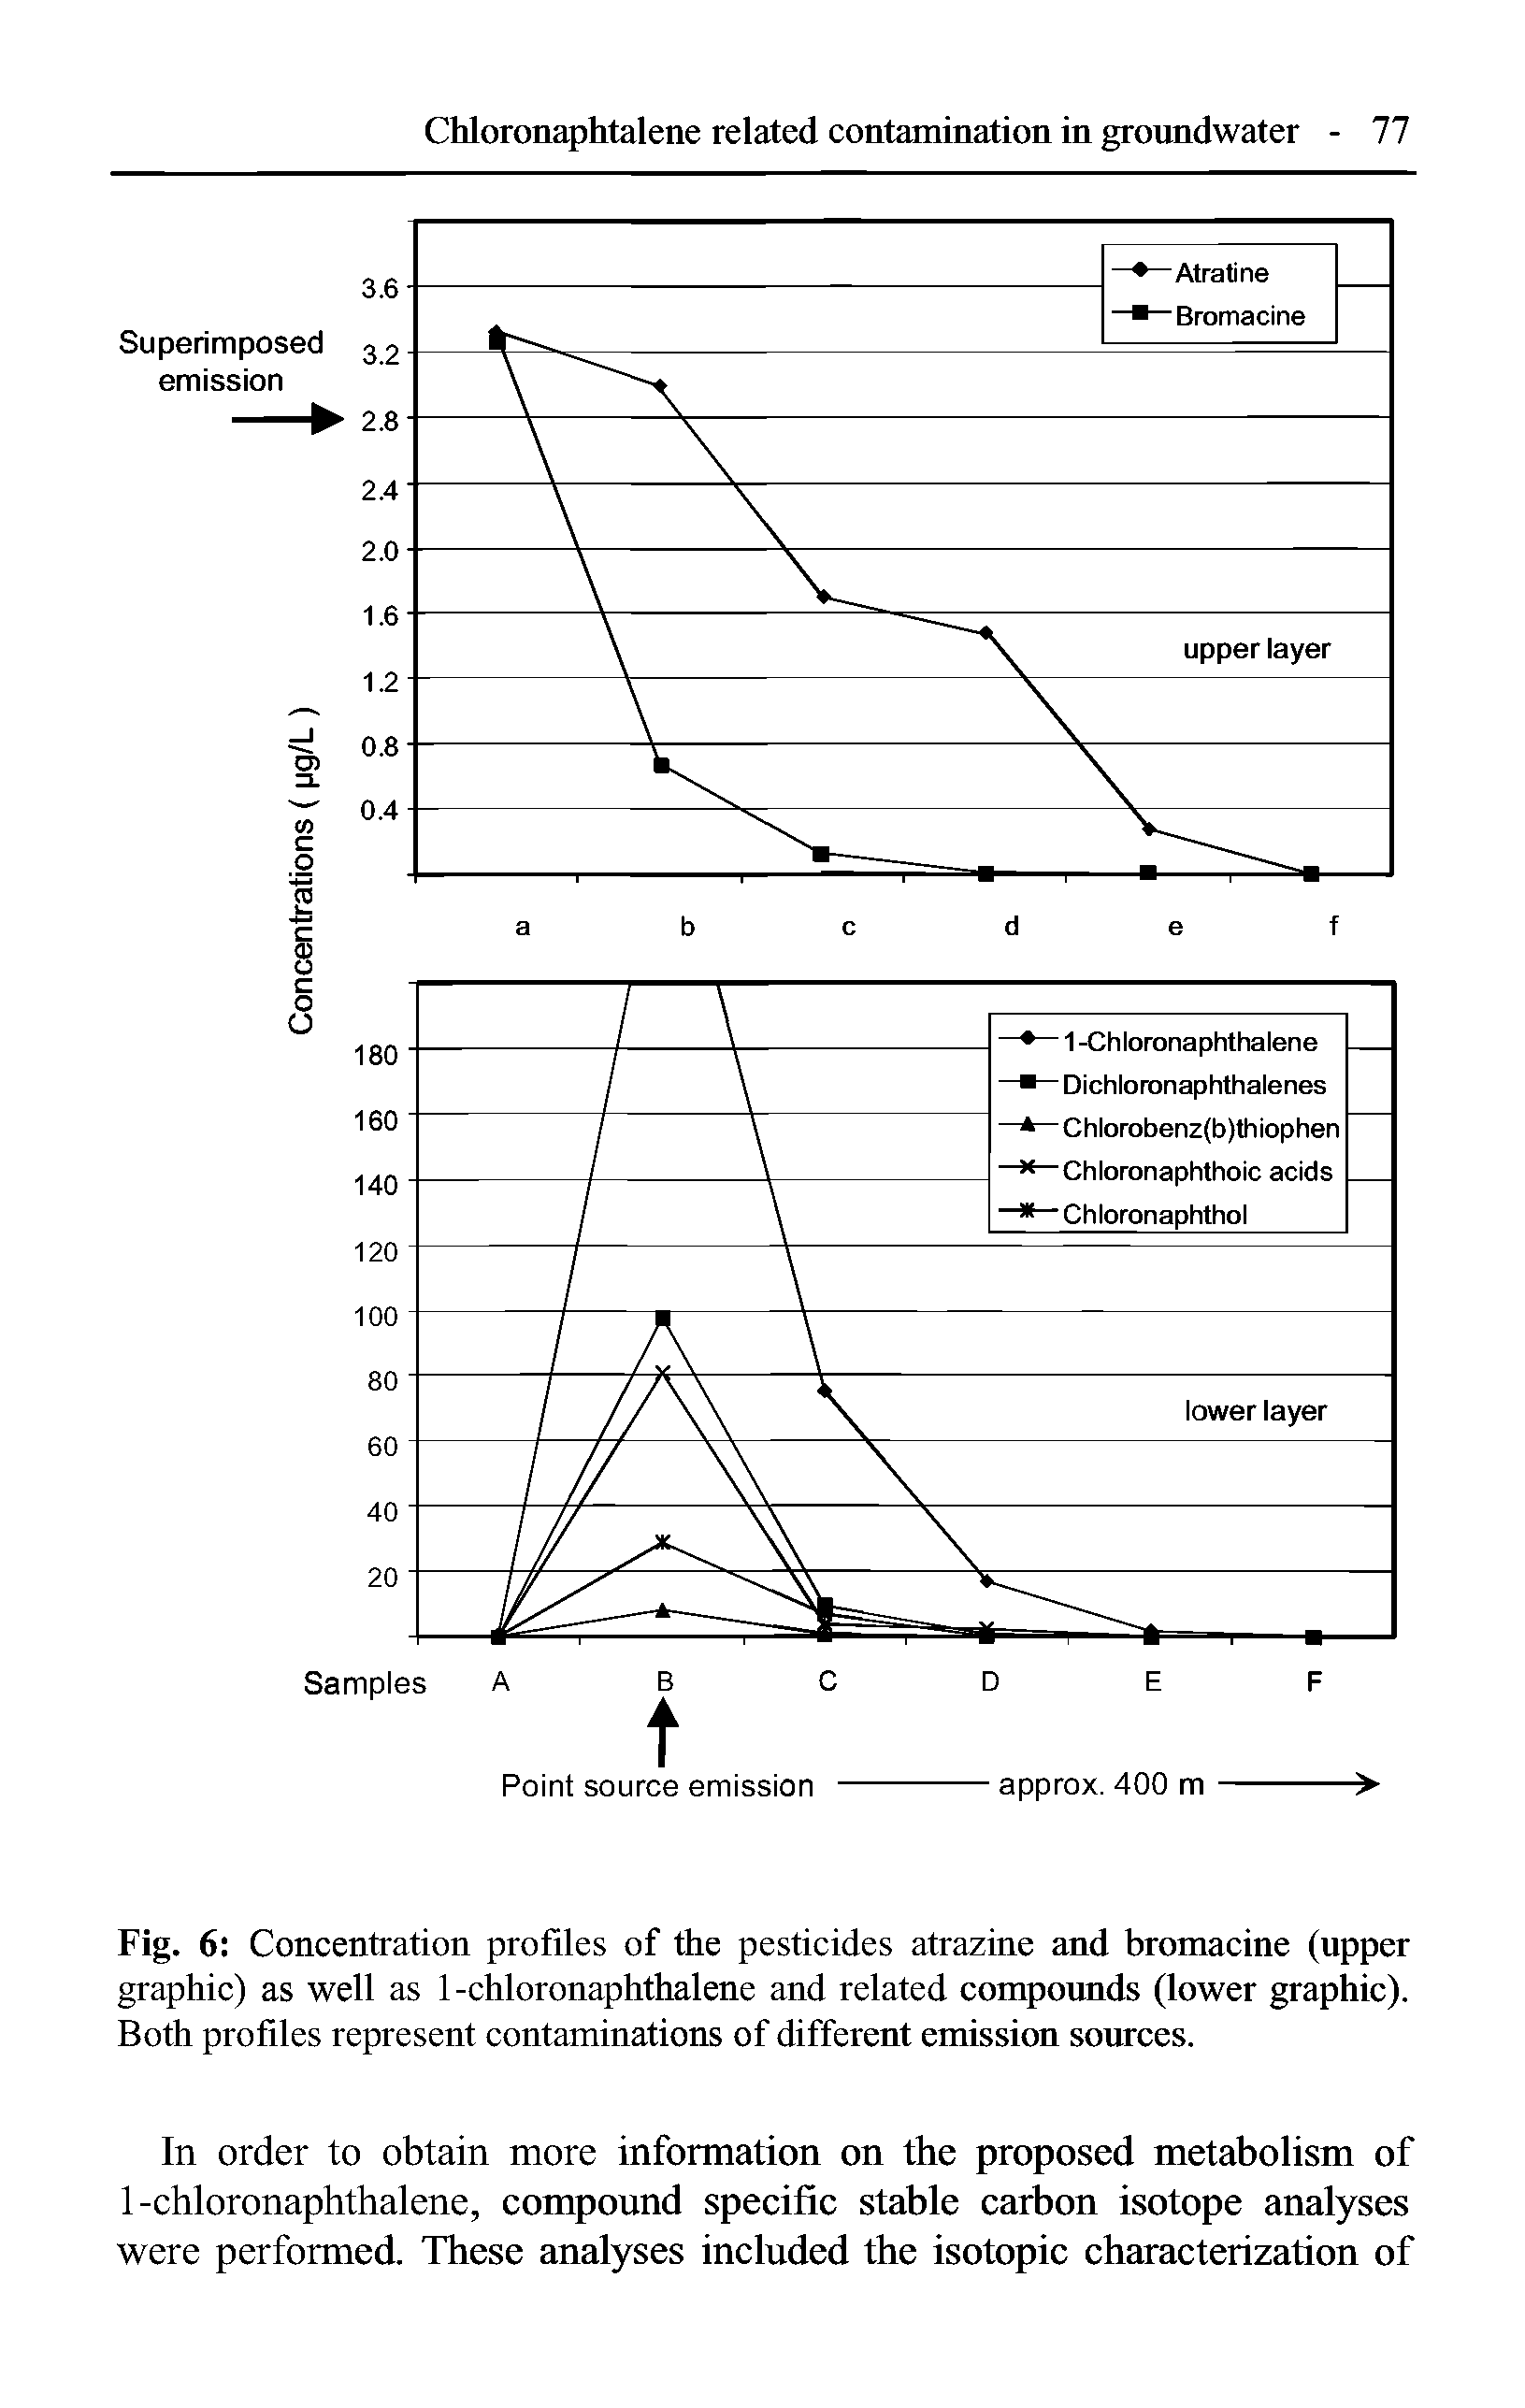 Fig. 6 Concentration profiles of the pesticides atrazine and bromacine (upper graphic) as well as 1-chloronaphthalene and related compounds (lower graphic). Both profiles represent contaminations of different emission sources.